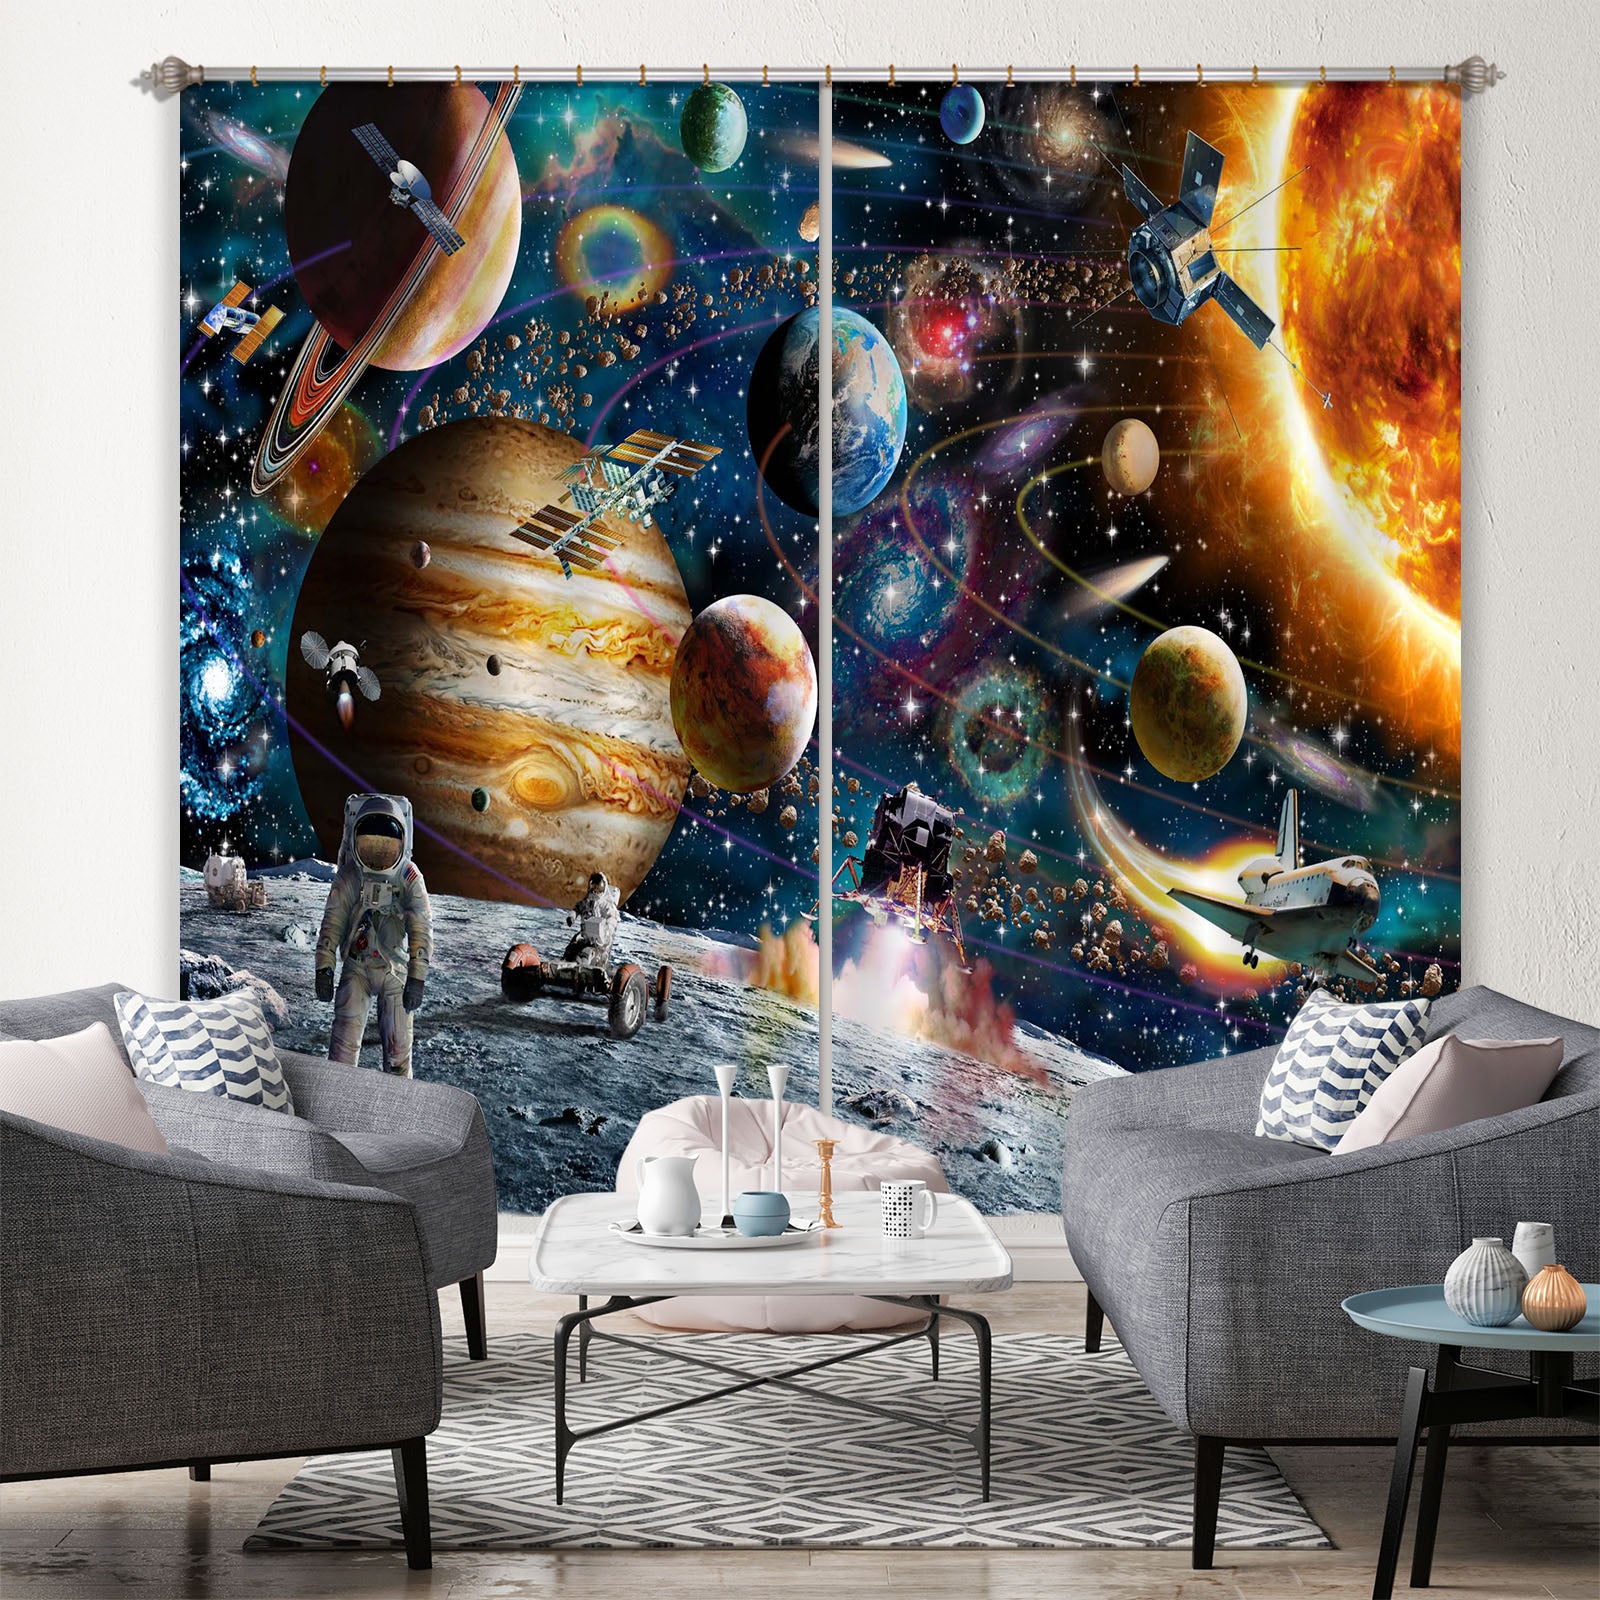 3D Space Odyssey 044 Adrian Chesterman Curtain Curtains Drapes